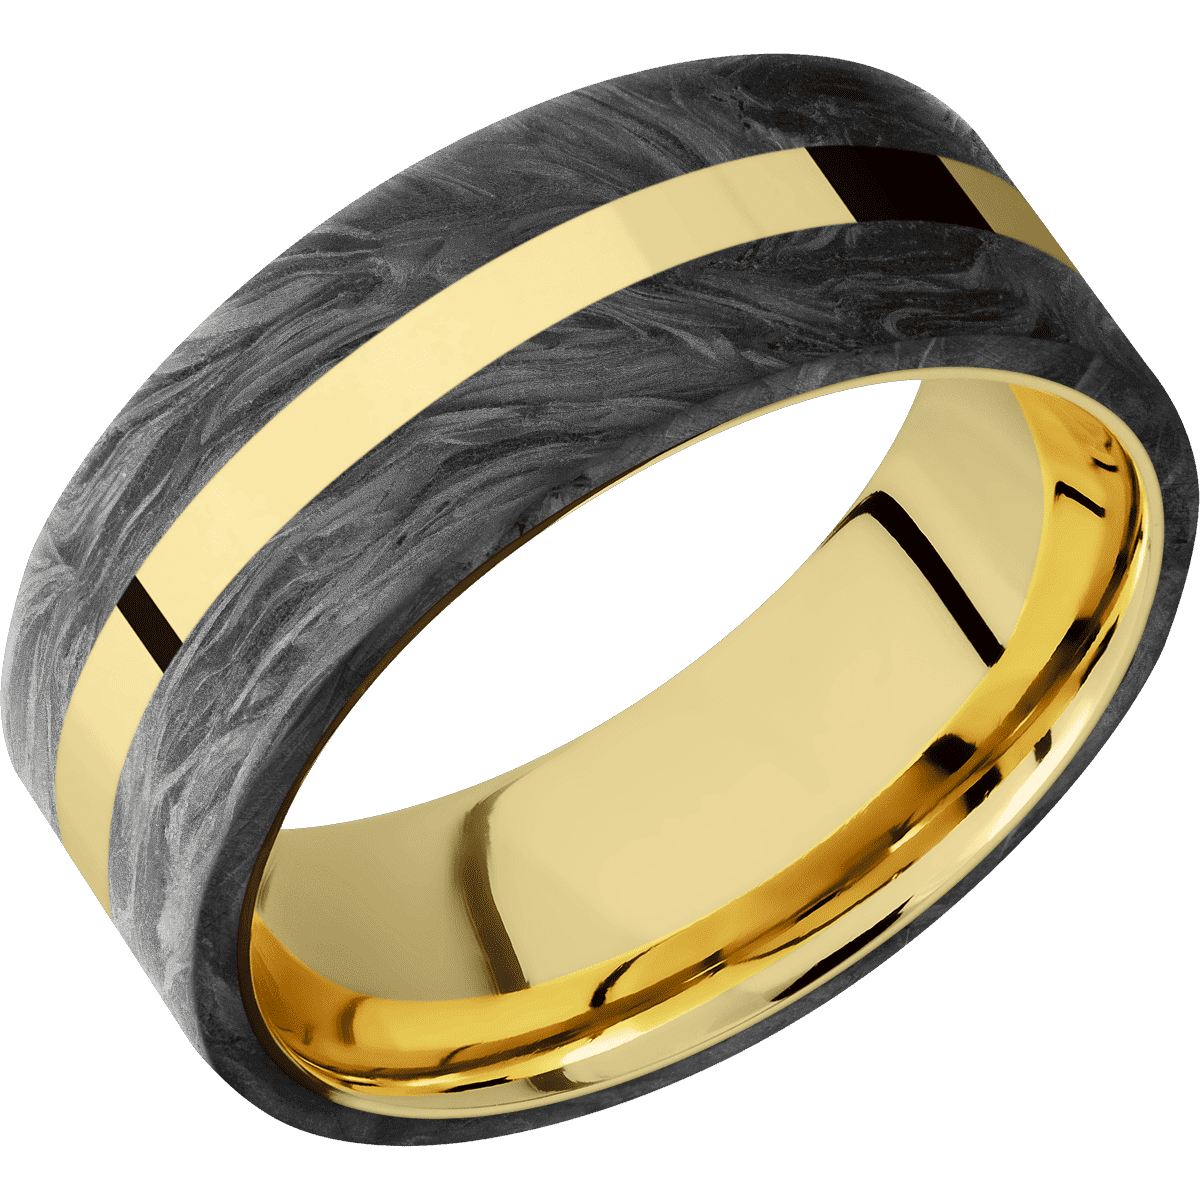 14K Yellow Gold with Polish Finish and Forged Carbon Fiber Inlay